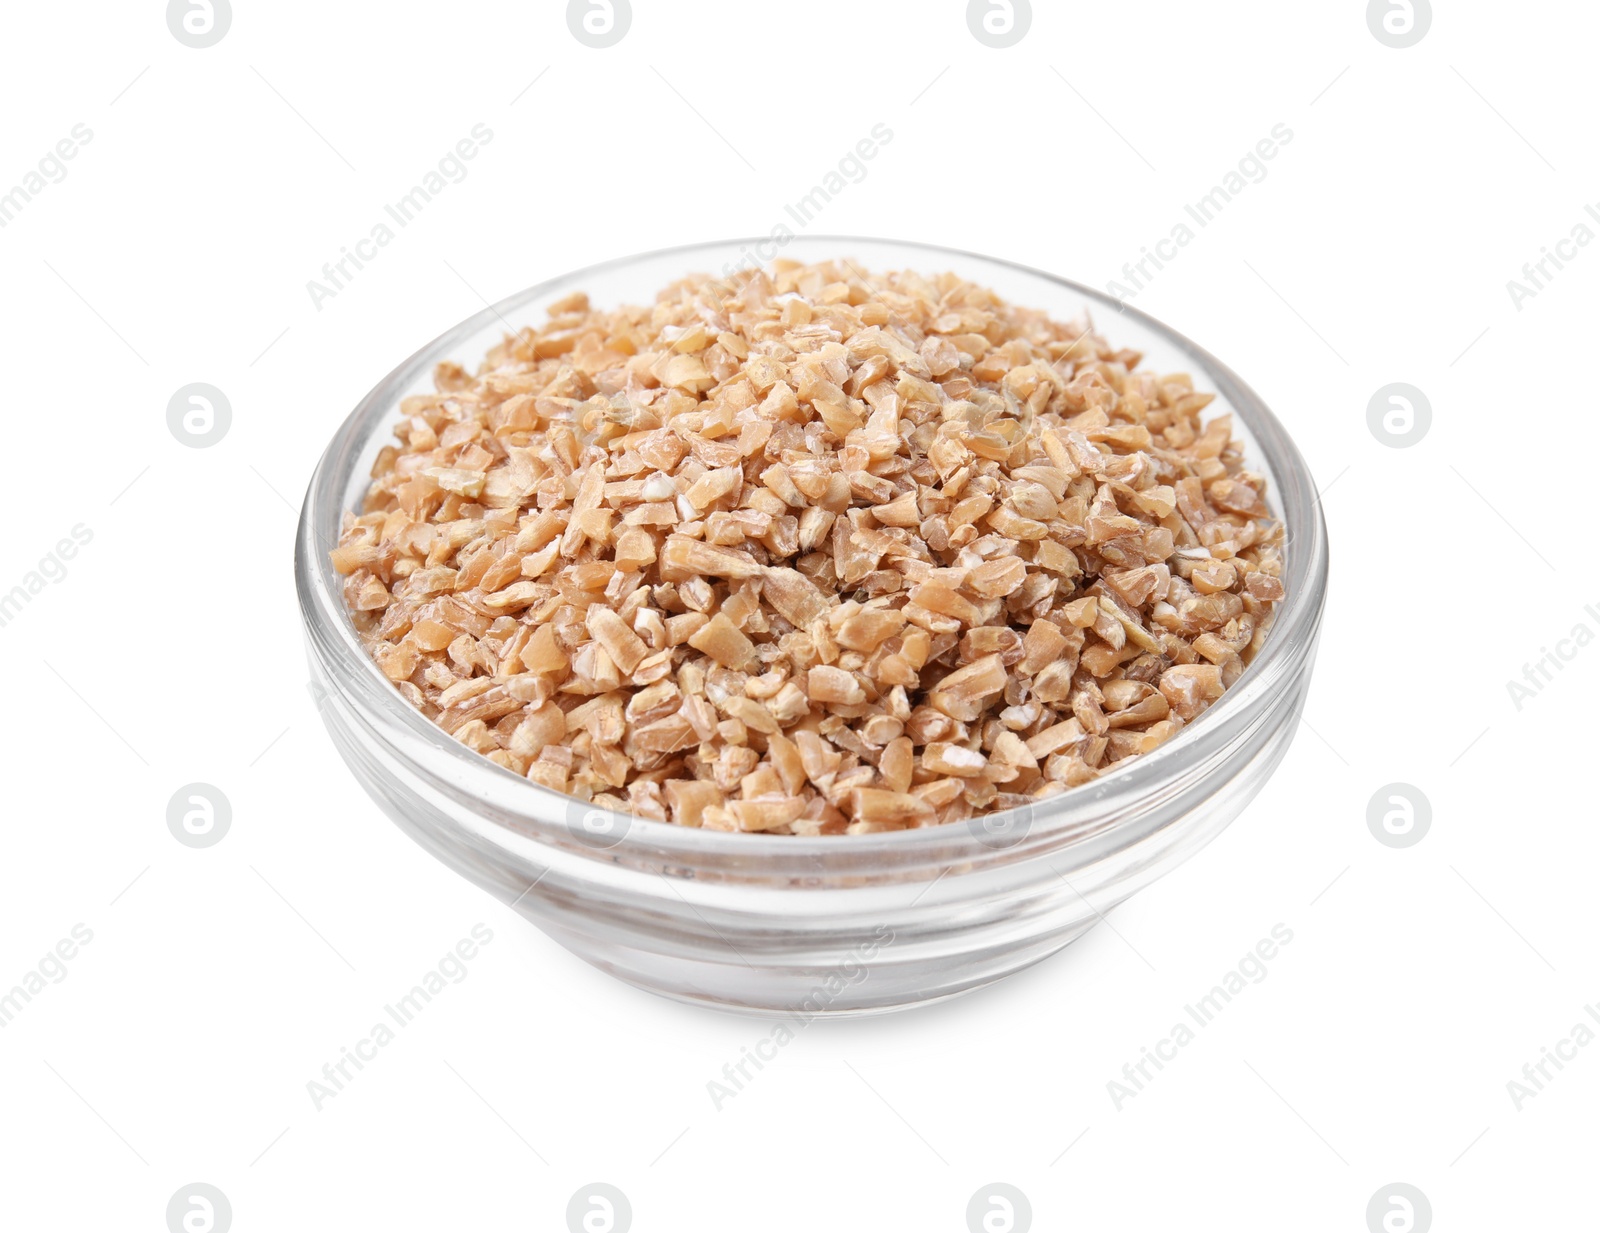 Photo of Dry wheat groats in glass bowl isolated on white